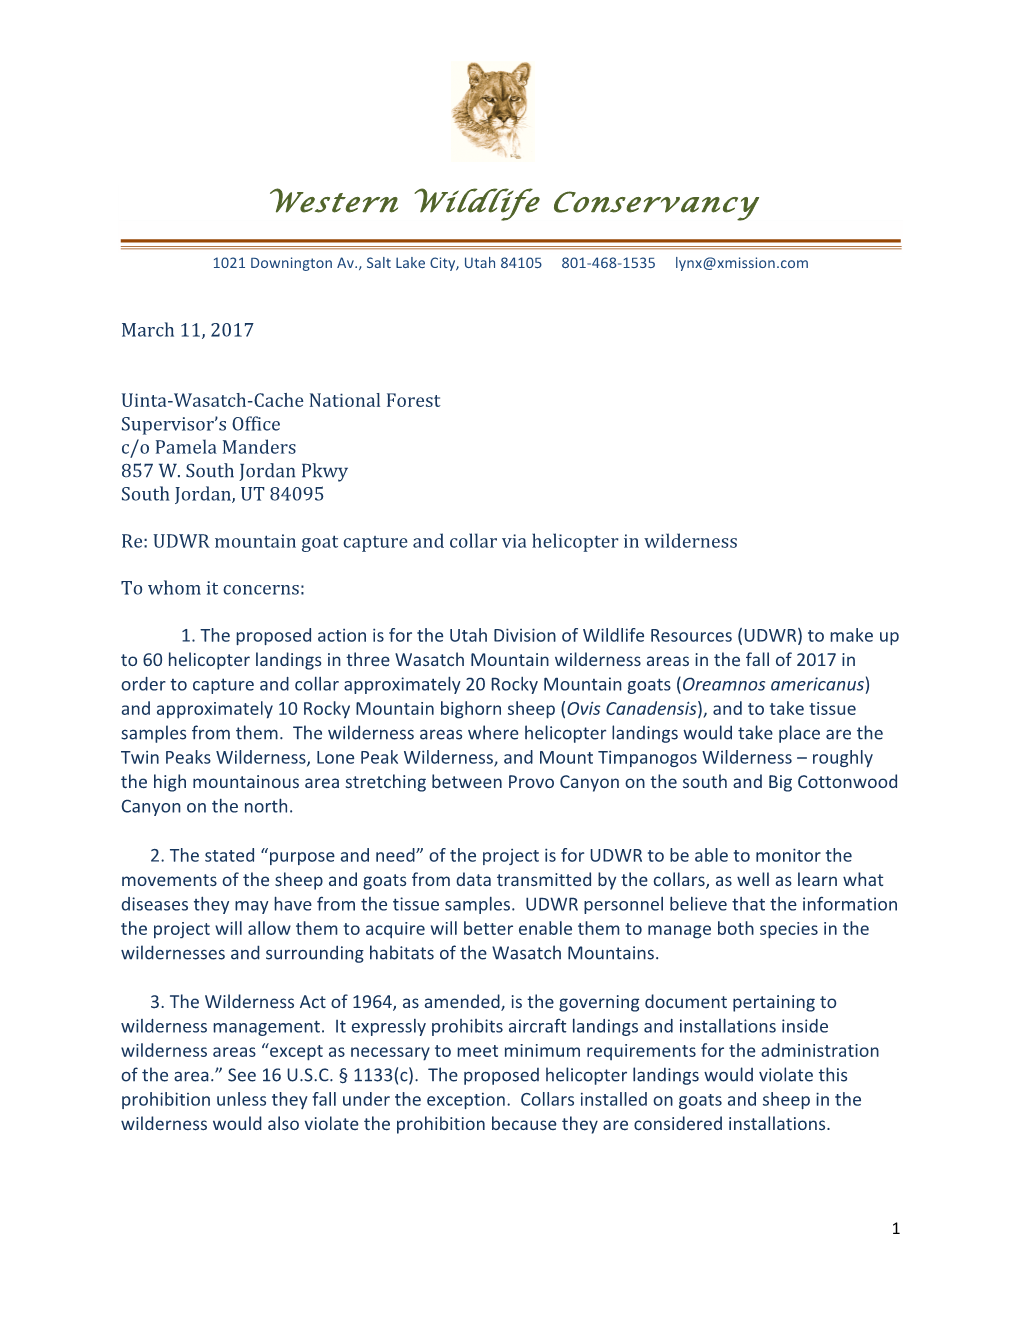 Letter to FS Re DWR Proposal